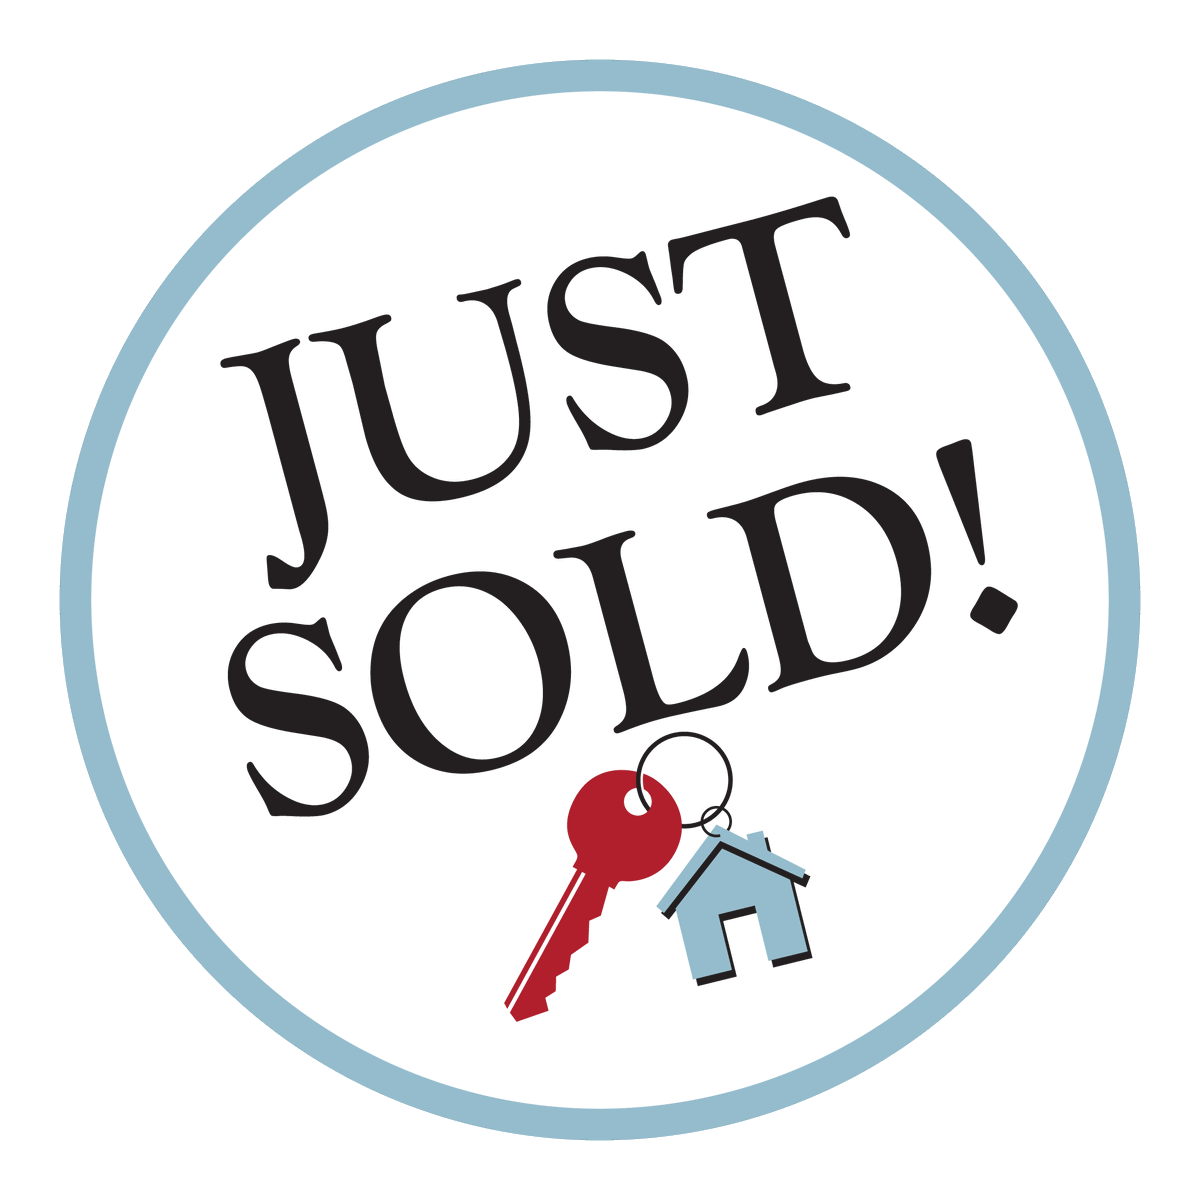 It's been a busy month of August, w-more coming next week. So thankful our Buyers ended up w-this gem in Stonebriar Park!  #JustSold #closed #happybuyers #stonebriarpark #wesellstonebriar #thejudiwrightteam #thewrightteamfortherighthome #makethewrightchoice #movingtotexas